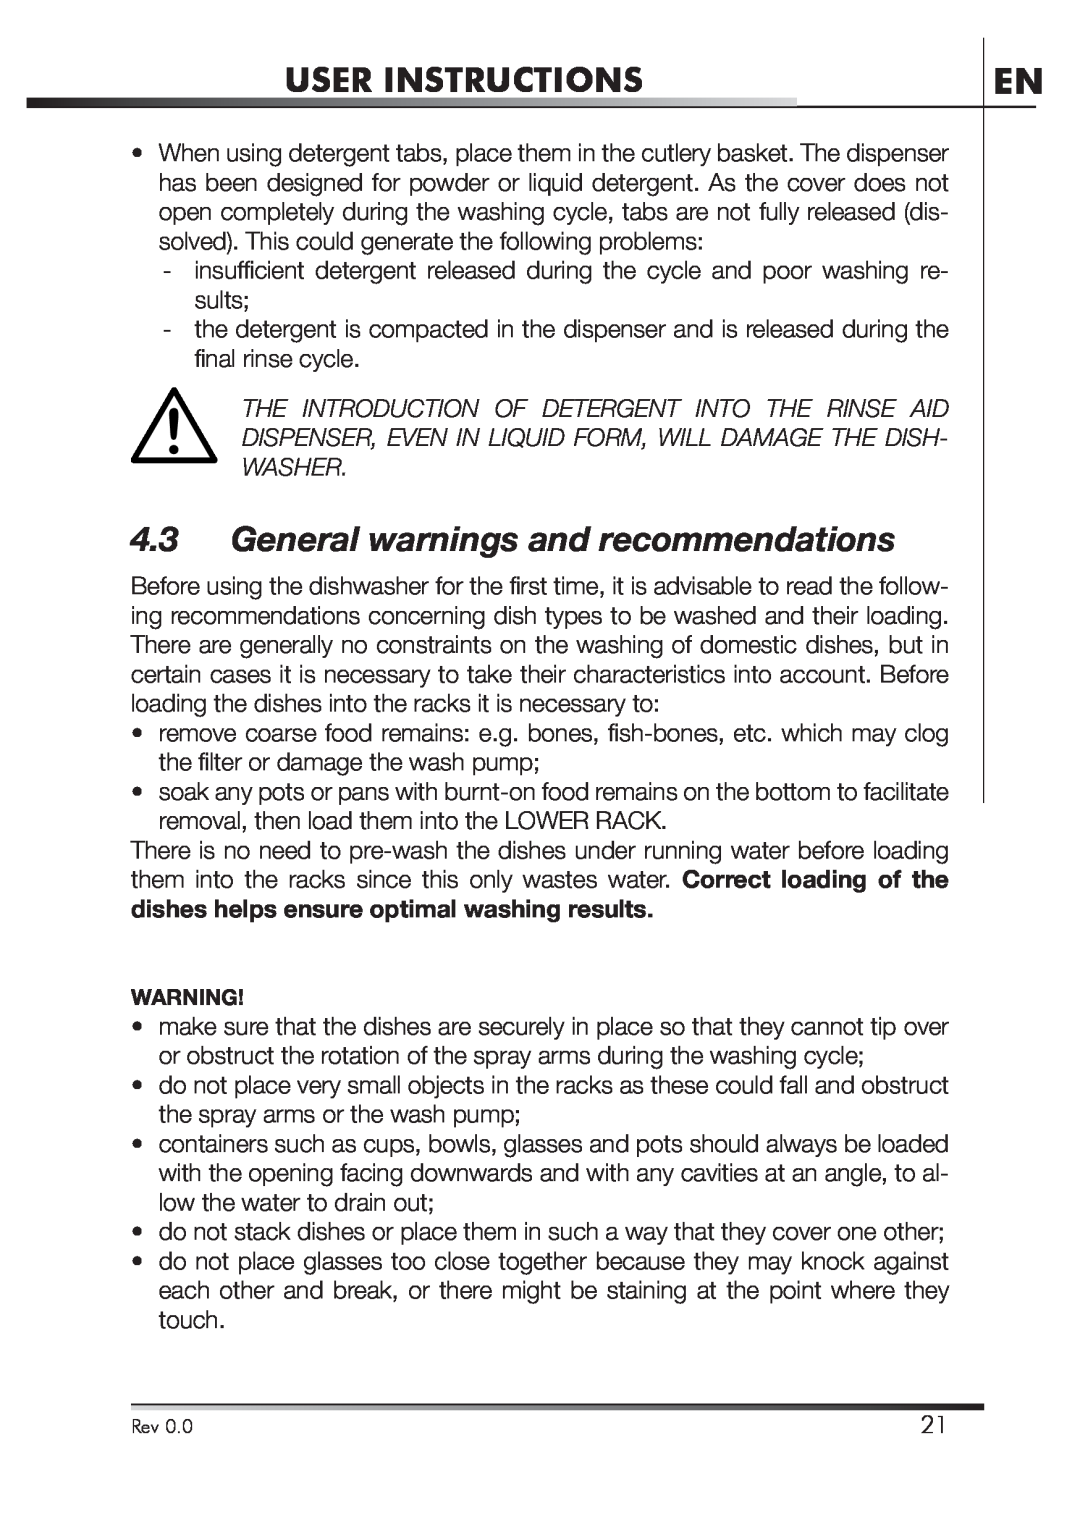 Smeg STA4645 instruction manual General warnings and recommendations, User Instructions 